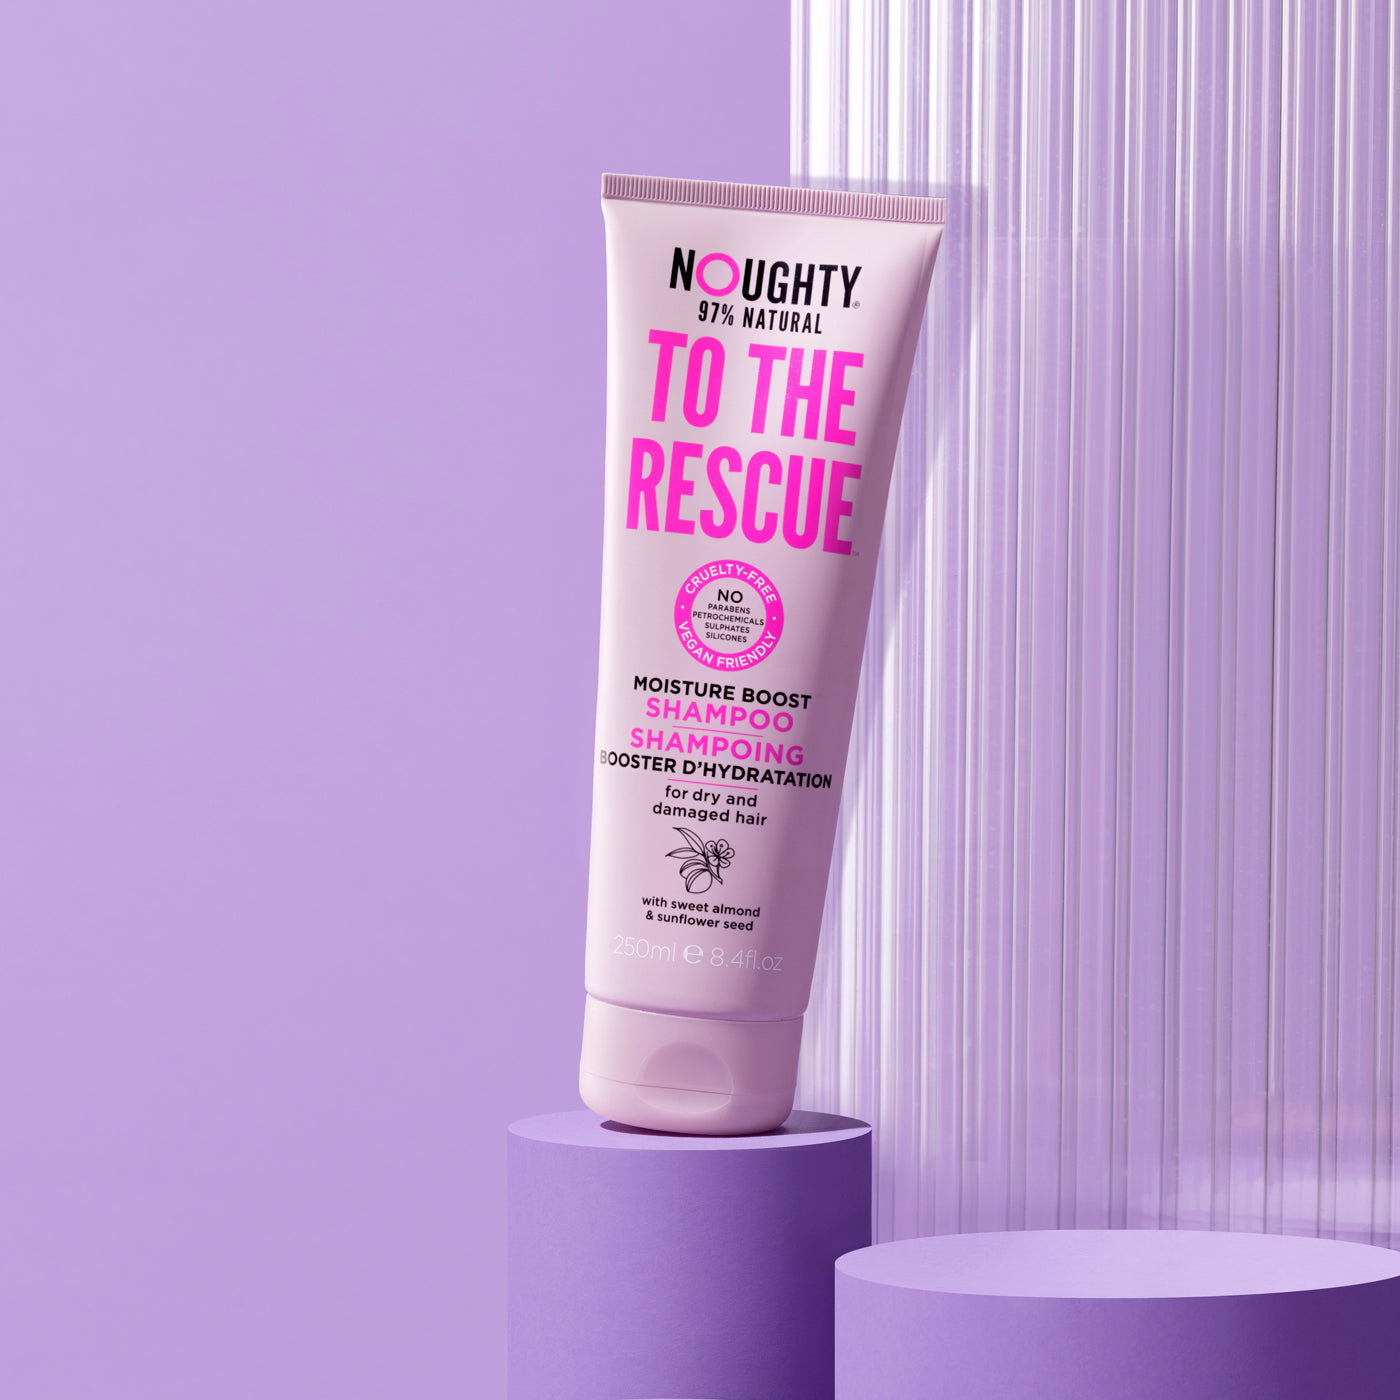 Noughty To The Rescue moisture boost shampoo for dry, damaged hair. Natural haircare vegan cruelty free natural sulphate free paraben free